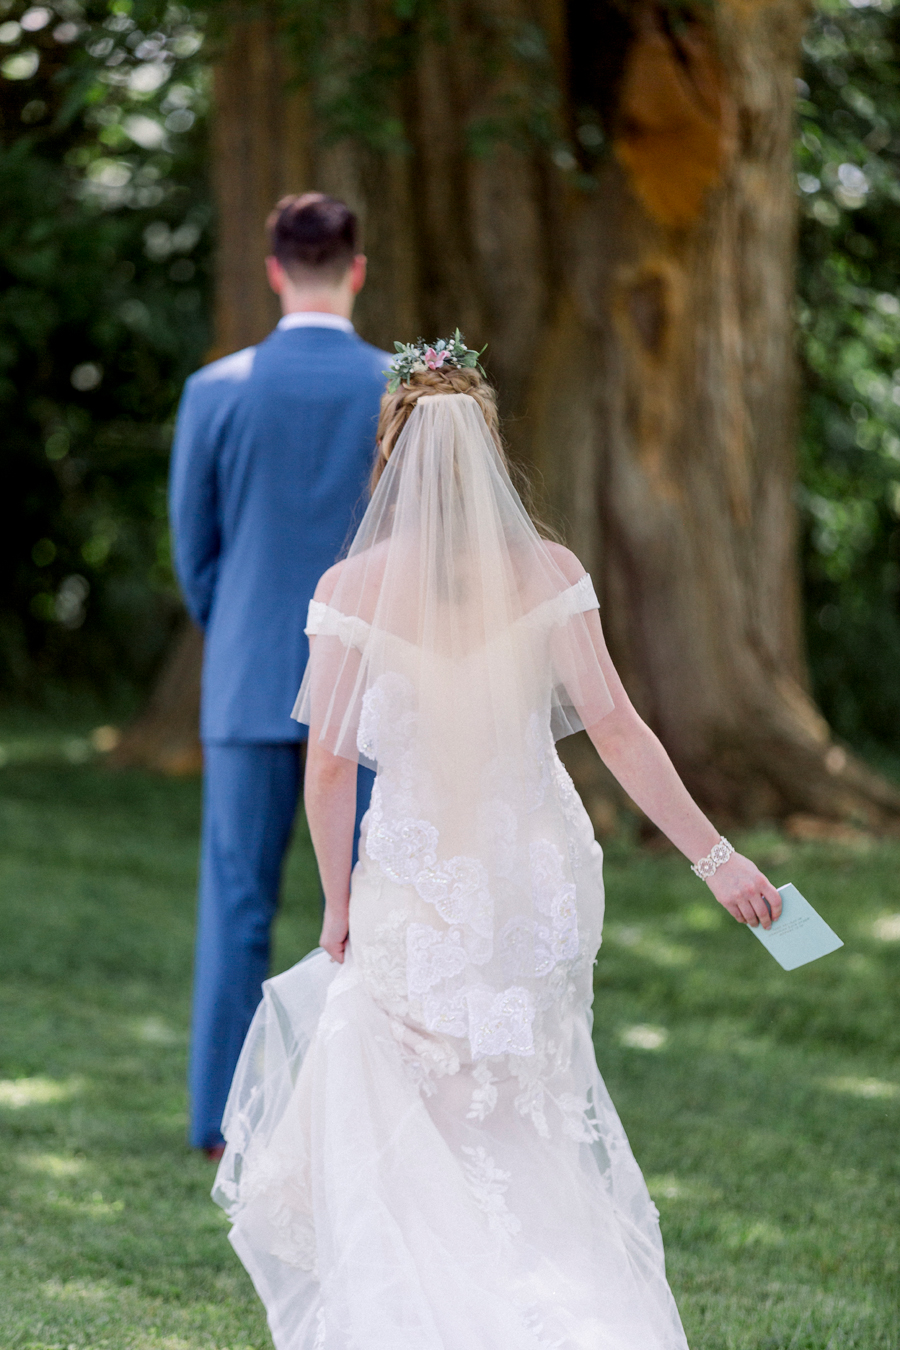 The bride sneaks up behind the groom during the first look at a Blue Bell Farm wedding by Love Tree Studios.